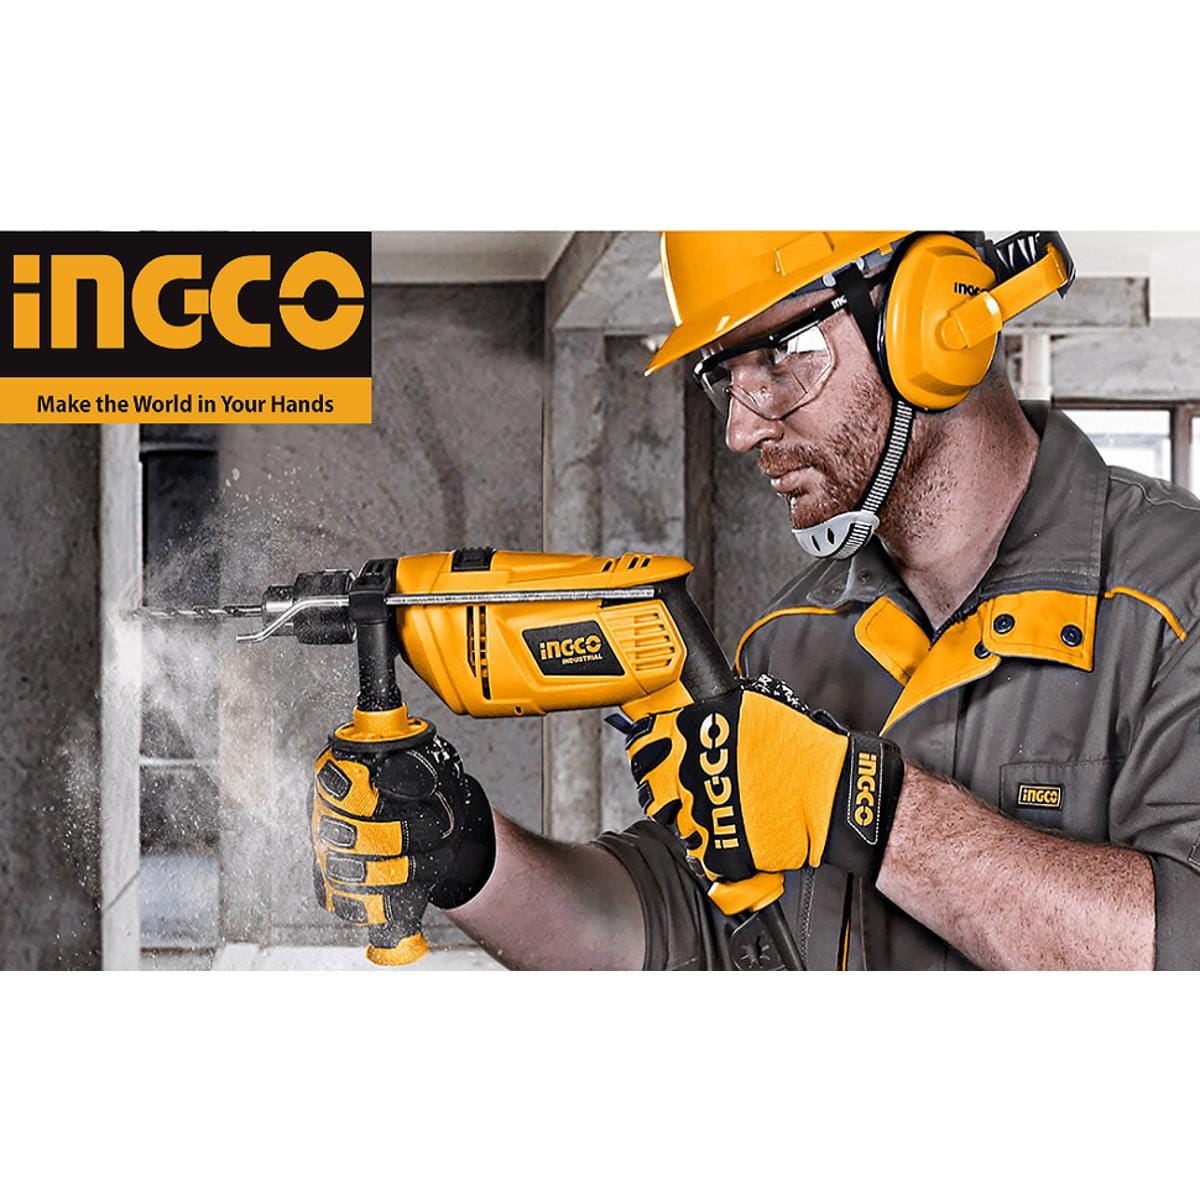 Ingco Hammer Impact Drill 13mm 680W - ID6808 - Buy Online in Accra, Ghana at Supply Master Drill Buy Tools hardware Building materials